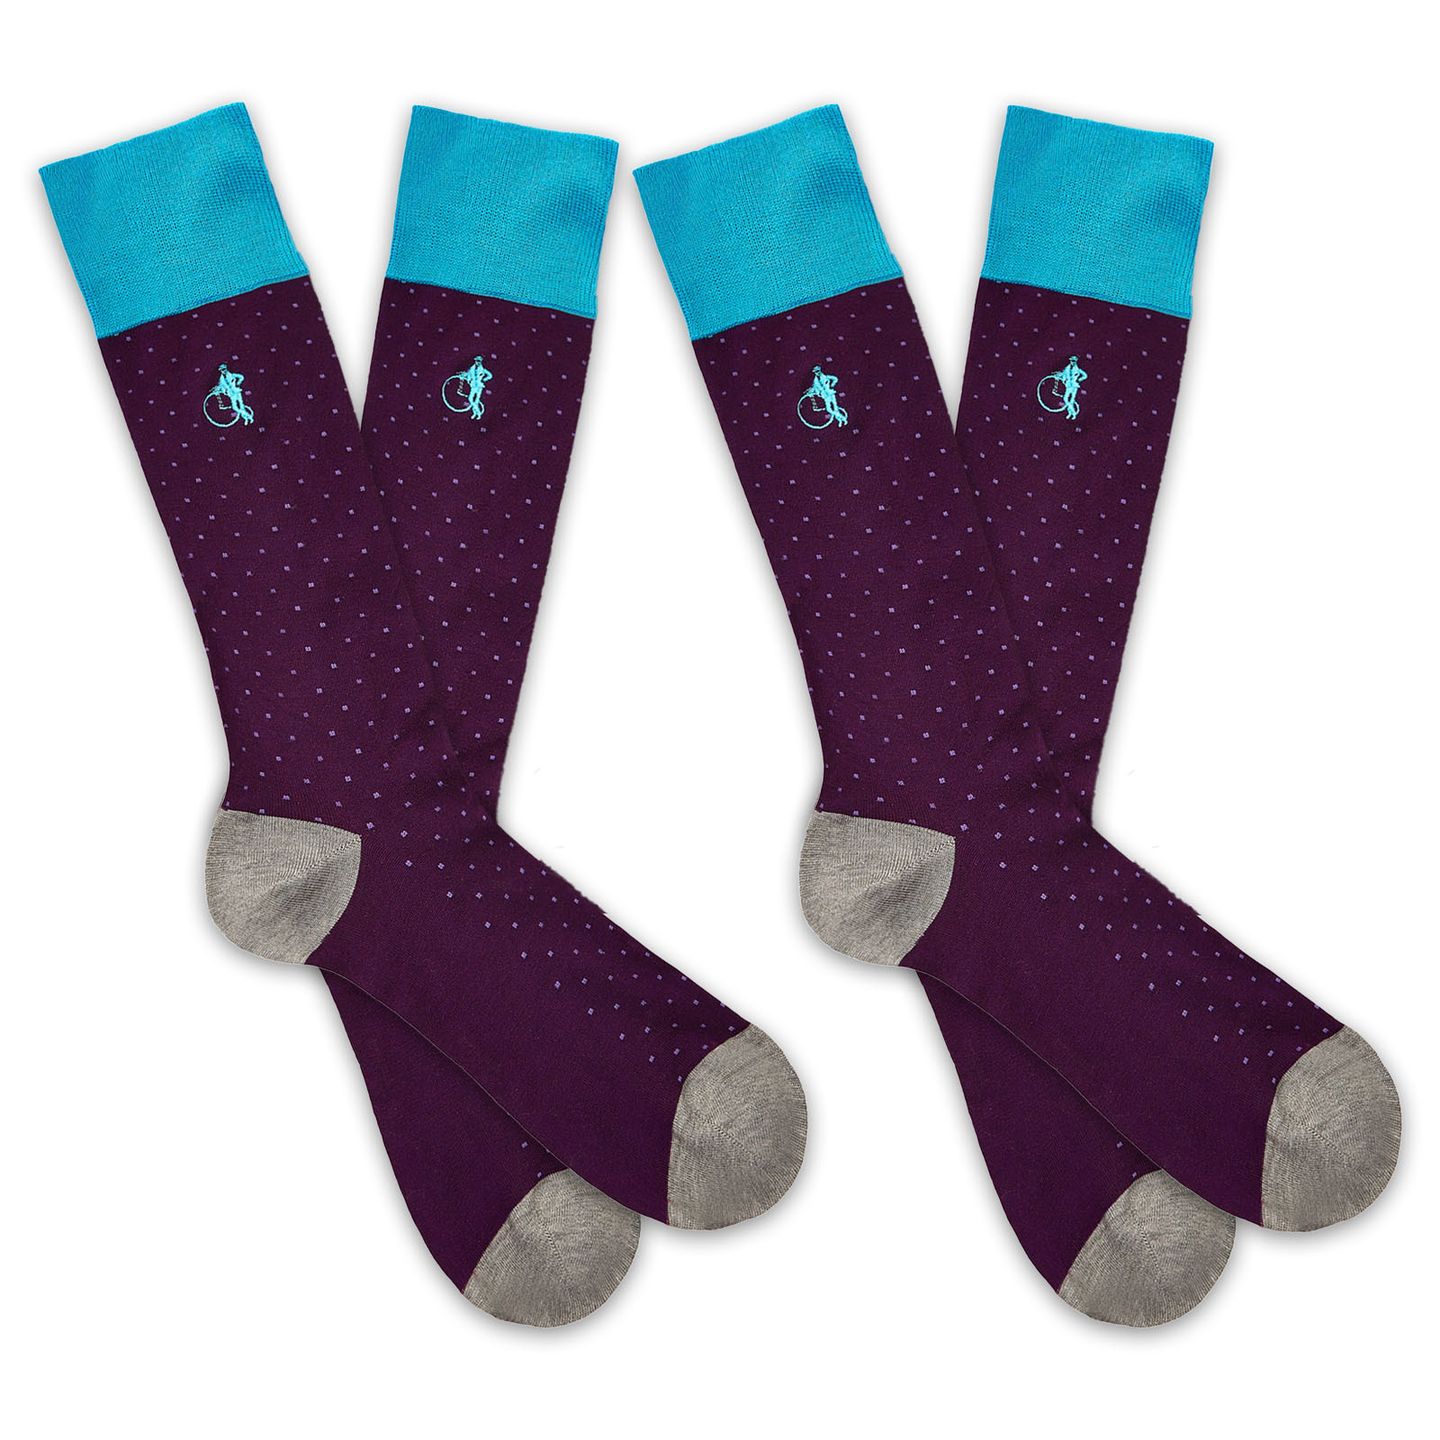 2 pair of patterned socks next to each other